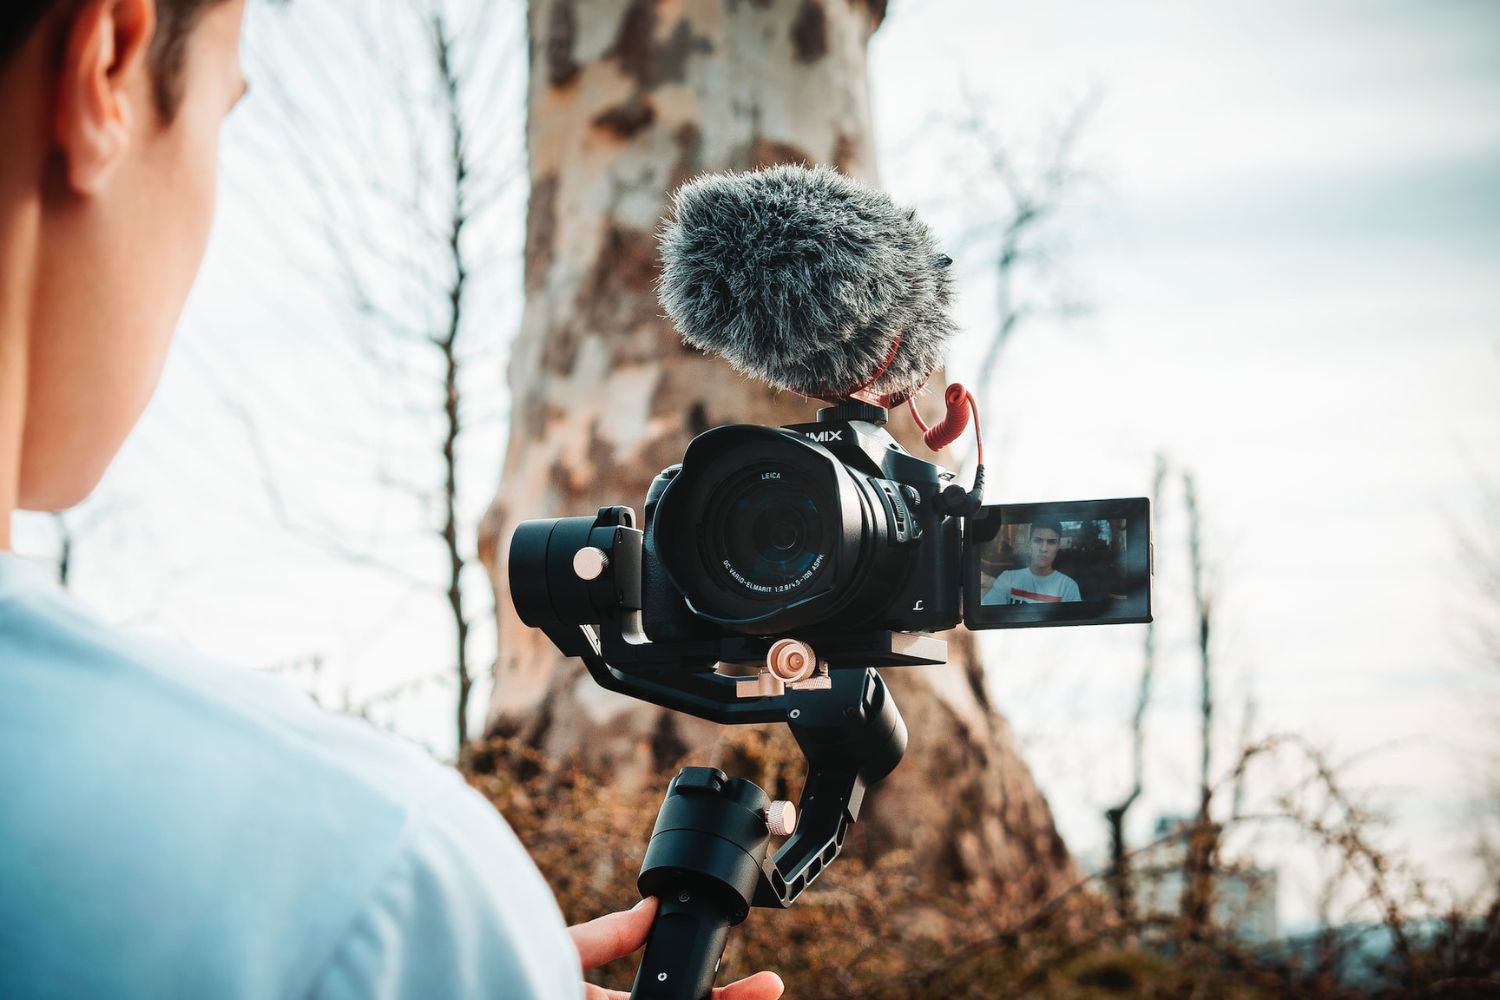 a man holding a gimbal and recording Photo by Sven Kucinic on Unsplash